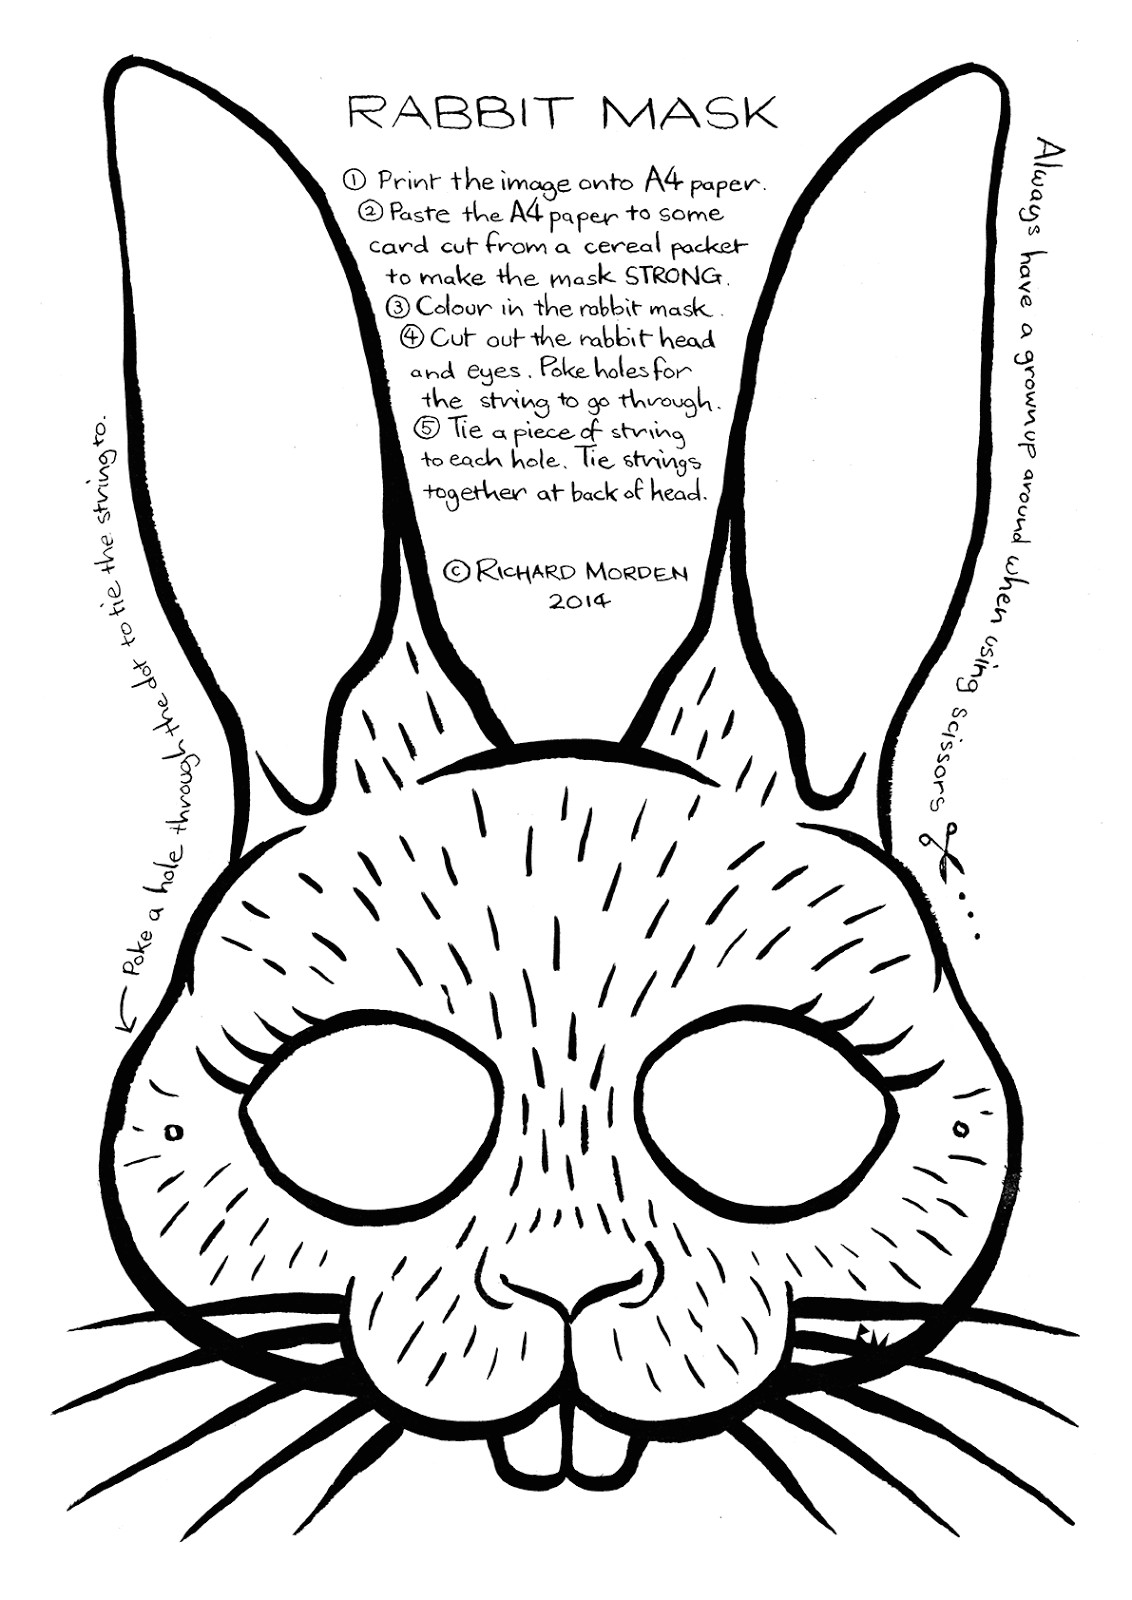 Drawing Rabbit Eyes Make Your Own Rabbit Mask Click Through to Print It Out Colour It